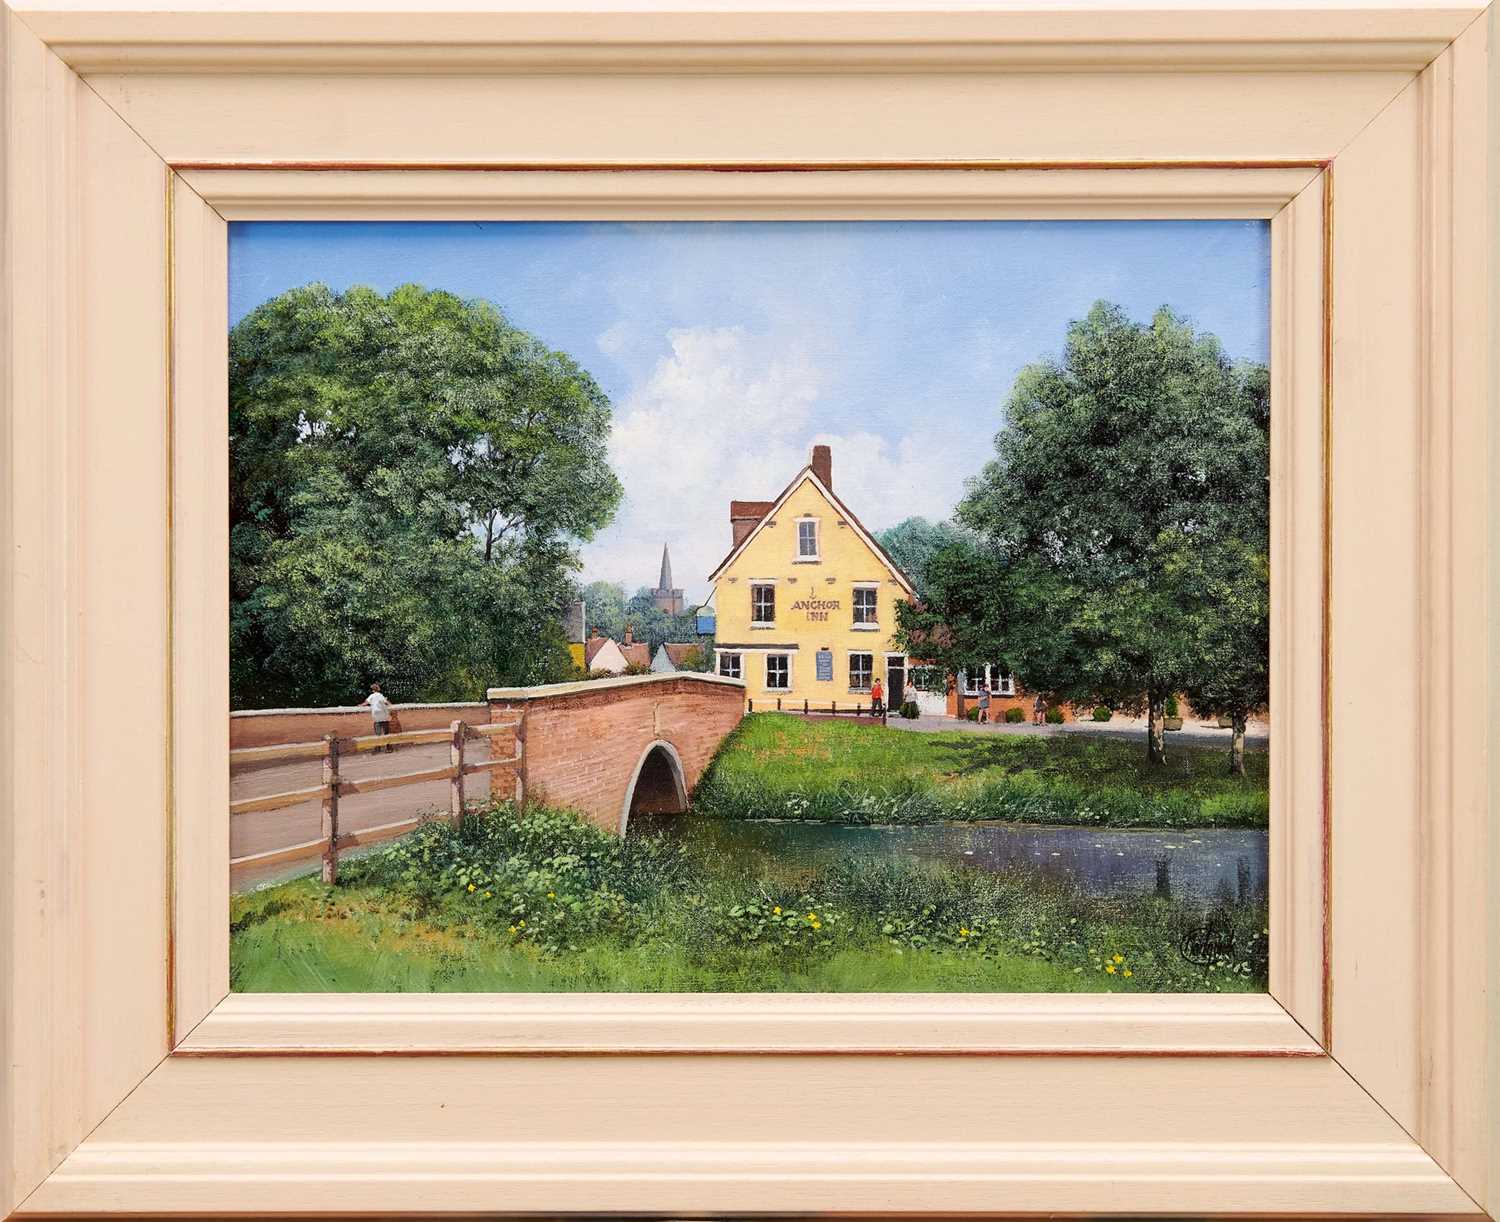 Lot 820 - *Clive Madgwick (1939-2005) acrylic on canvas -  The Anchor Inn, Nayland, signed, dated 2004 verso, 30.5cm x 40.5cm, framed